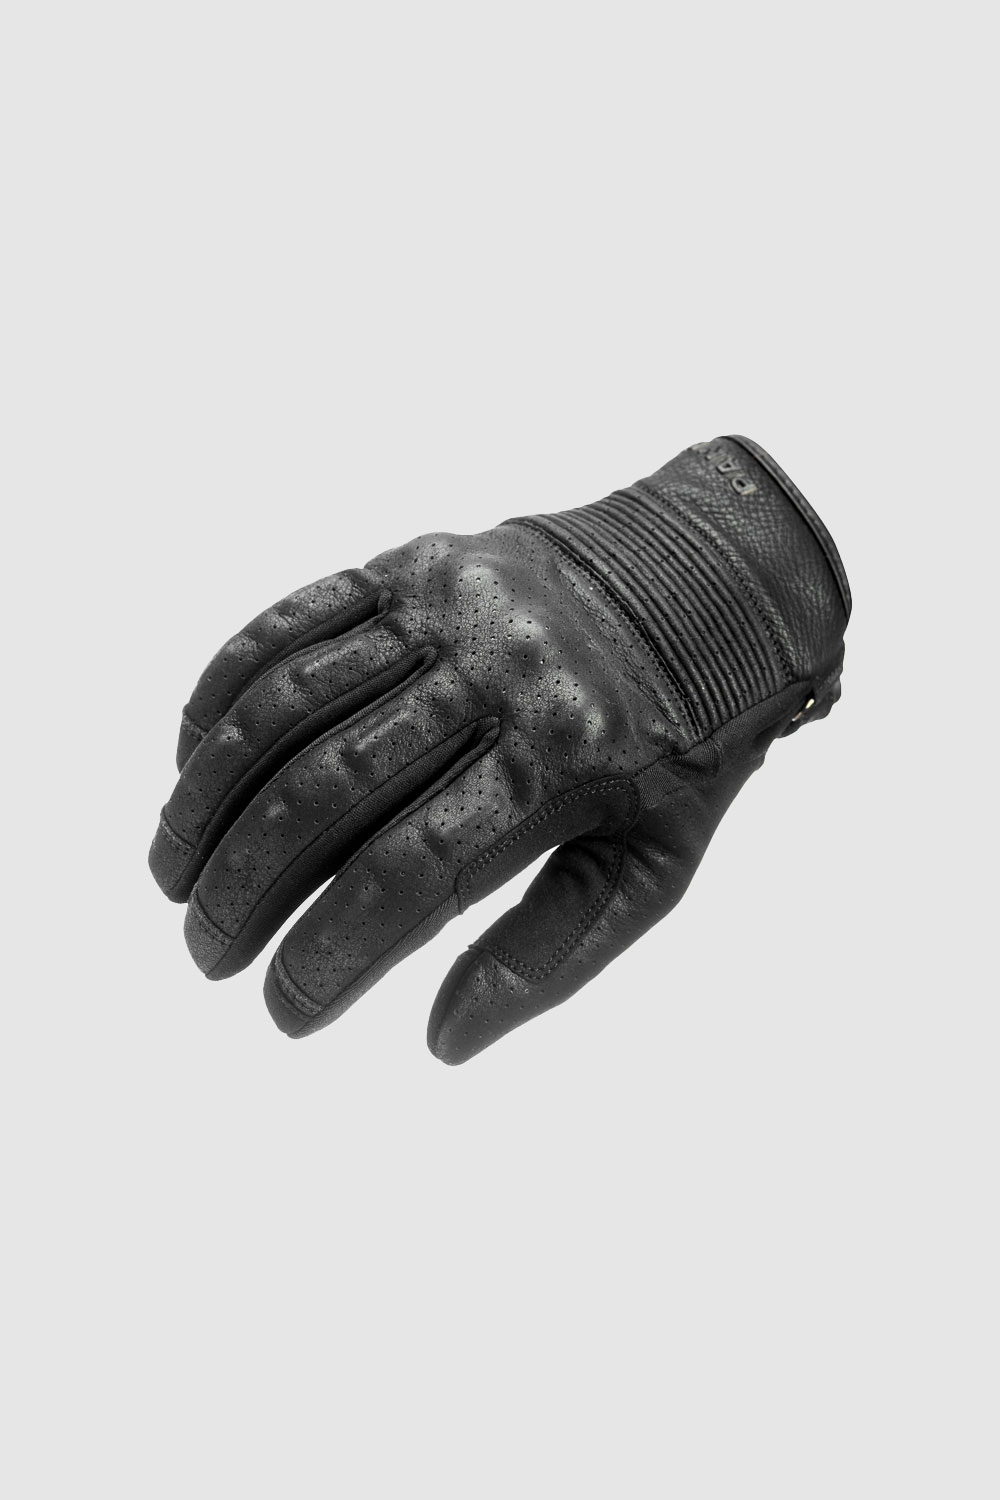 ONYX BLACK - Leather Motorcycle Gloves 1